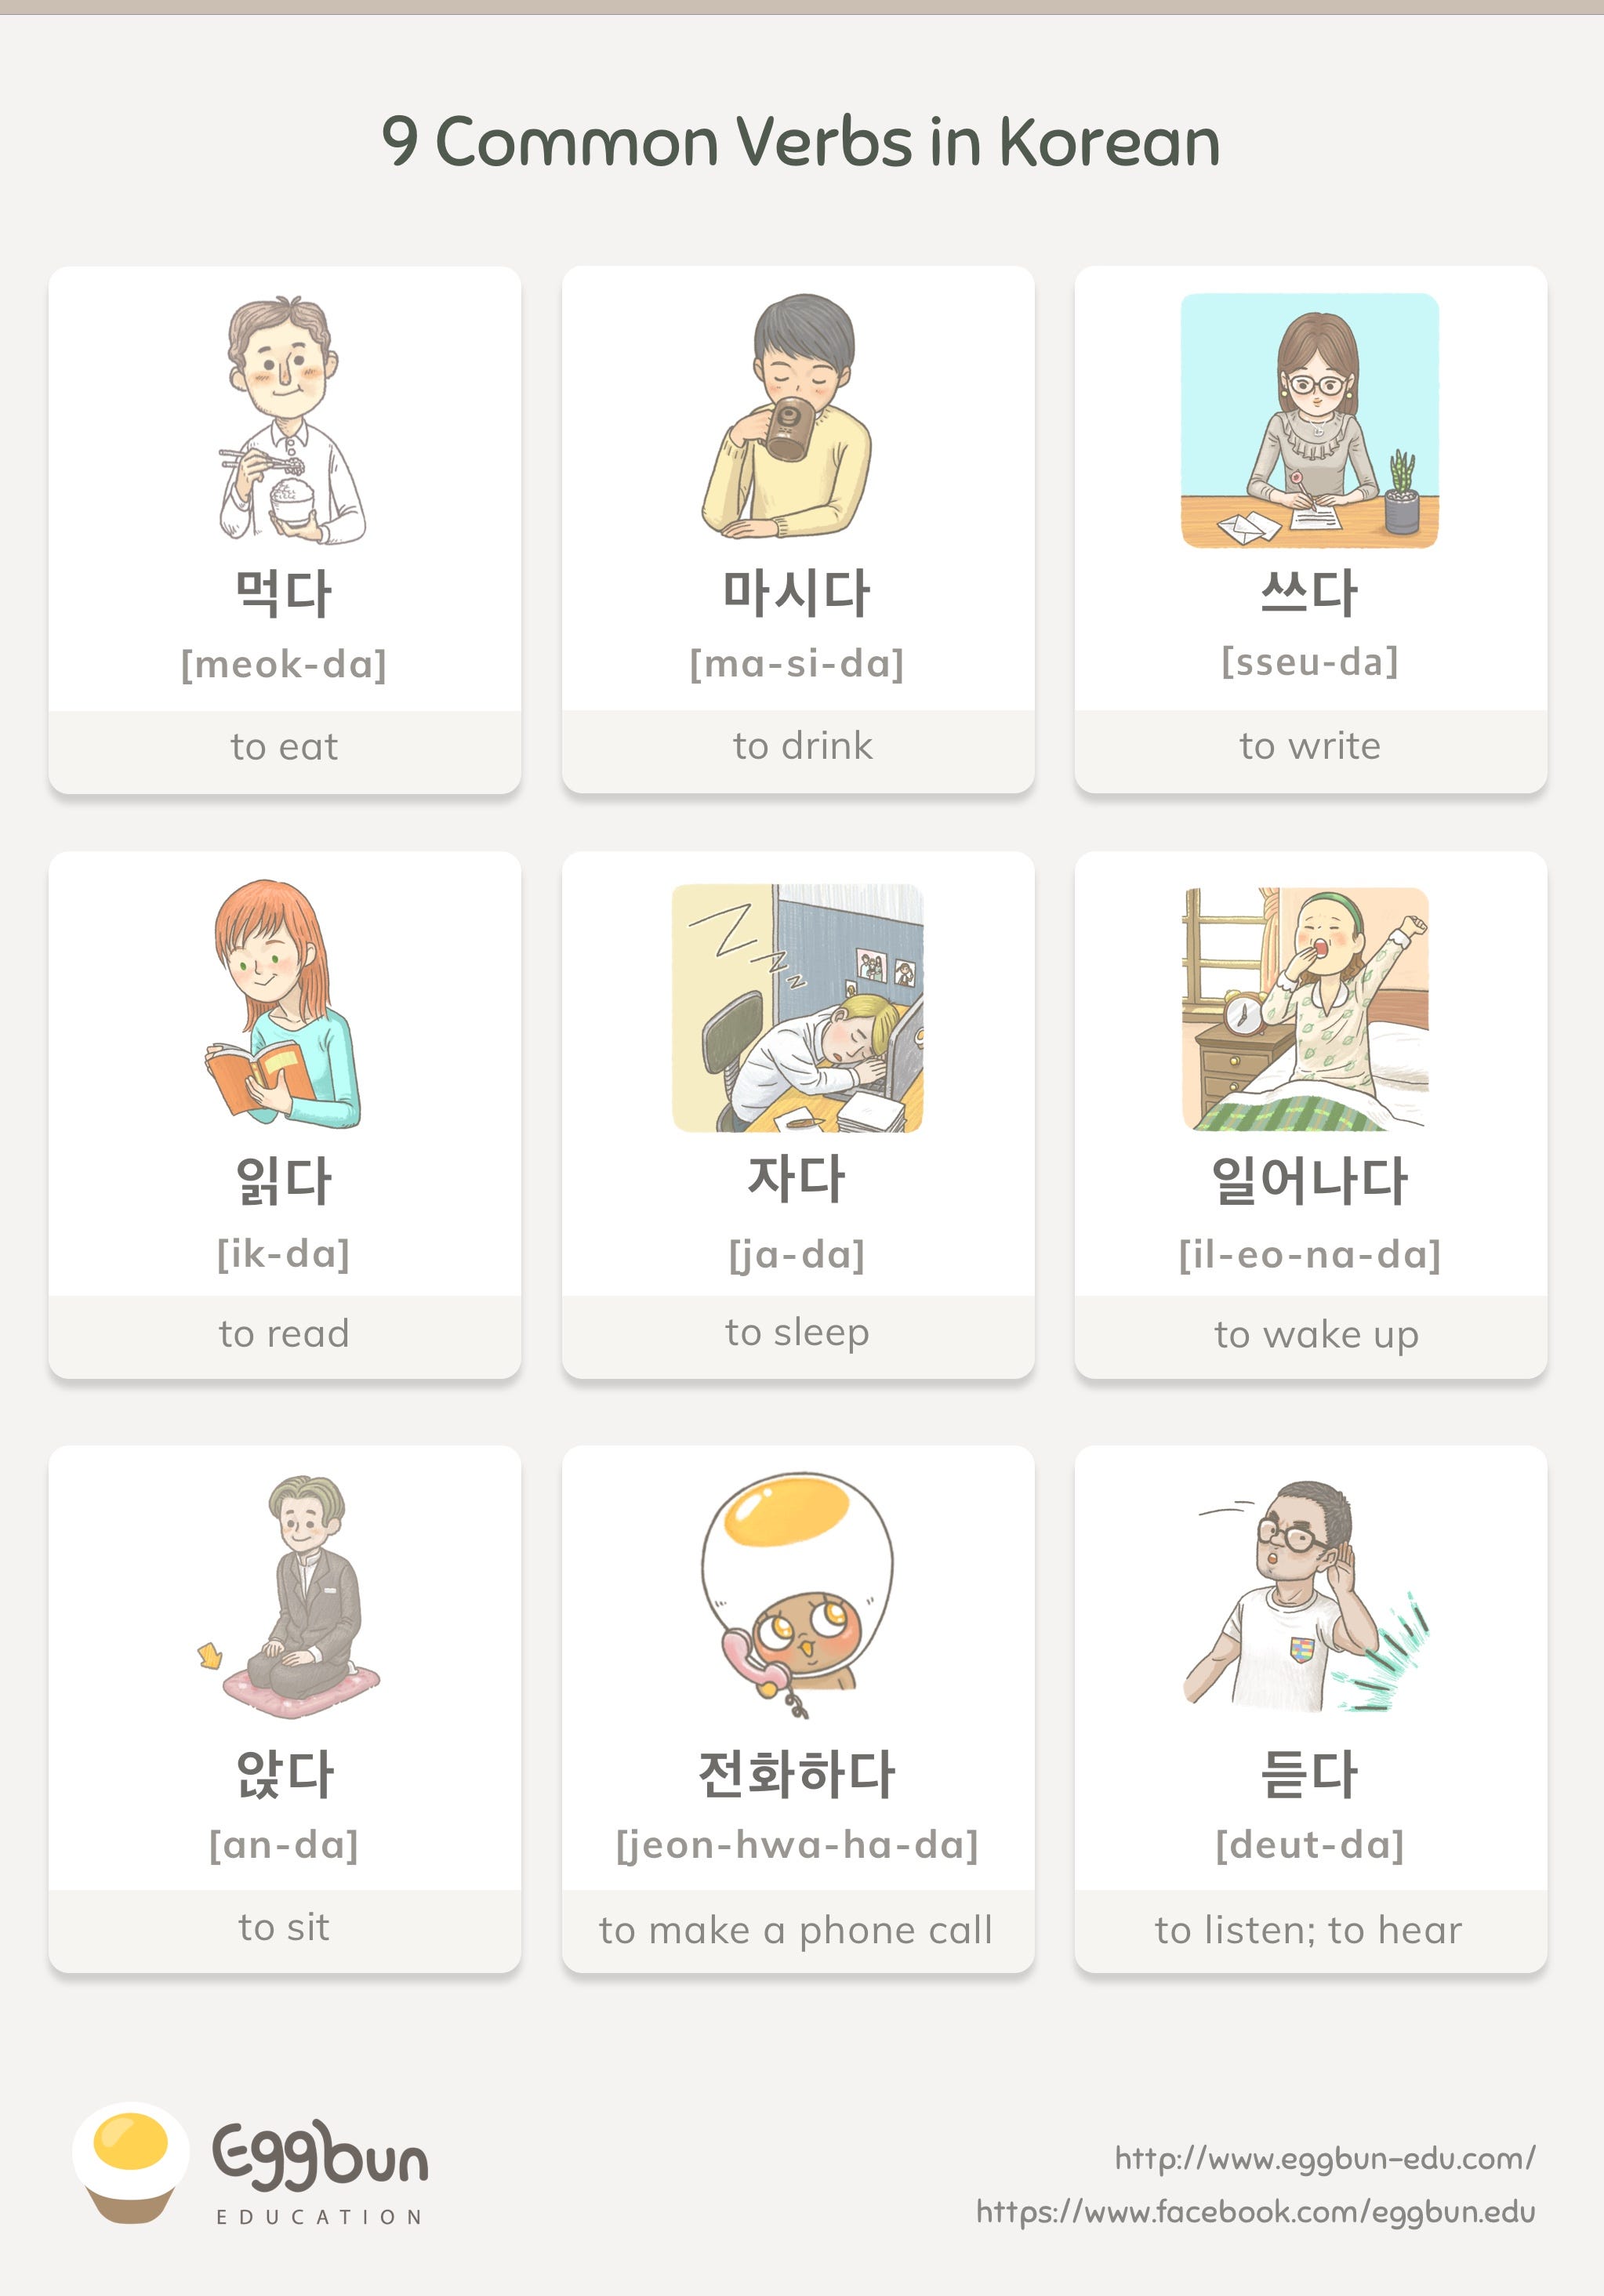 9-common-verbs-in-korean-the-best-way-to-learn-korean-is-to-live-by-miri-choi-story-of